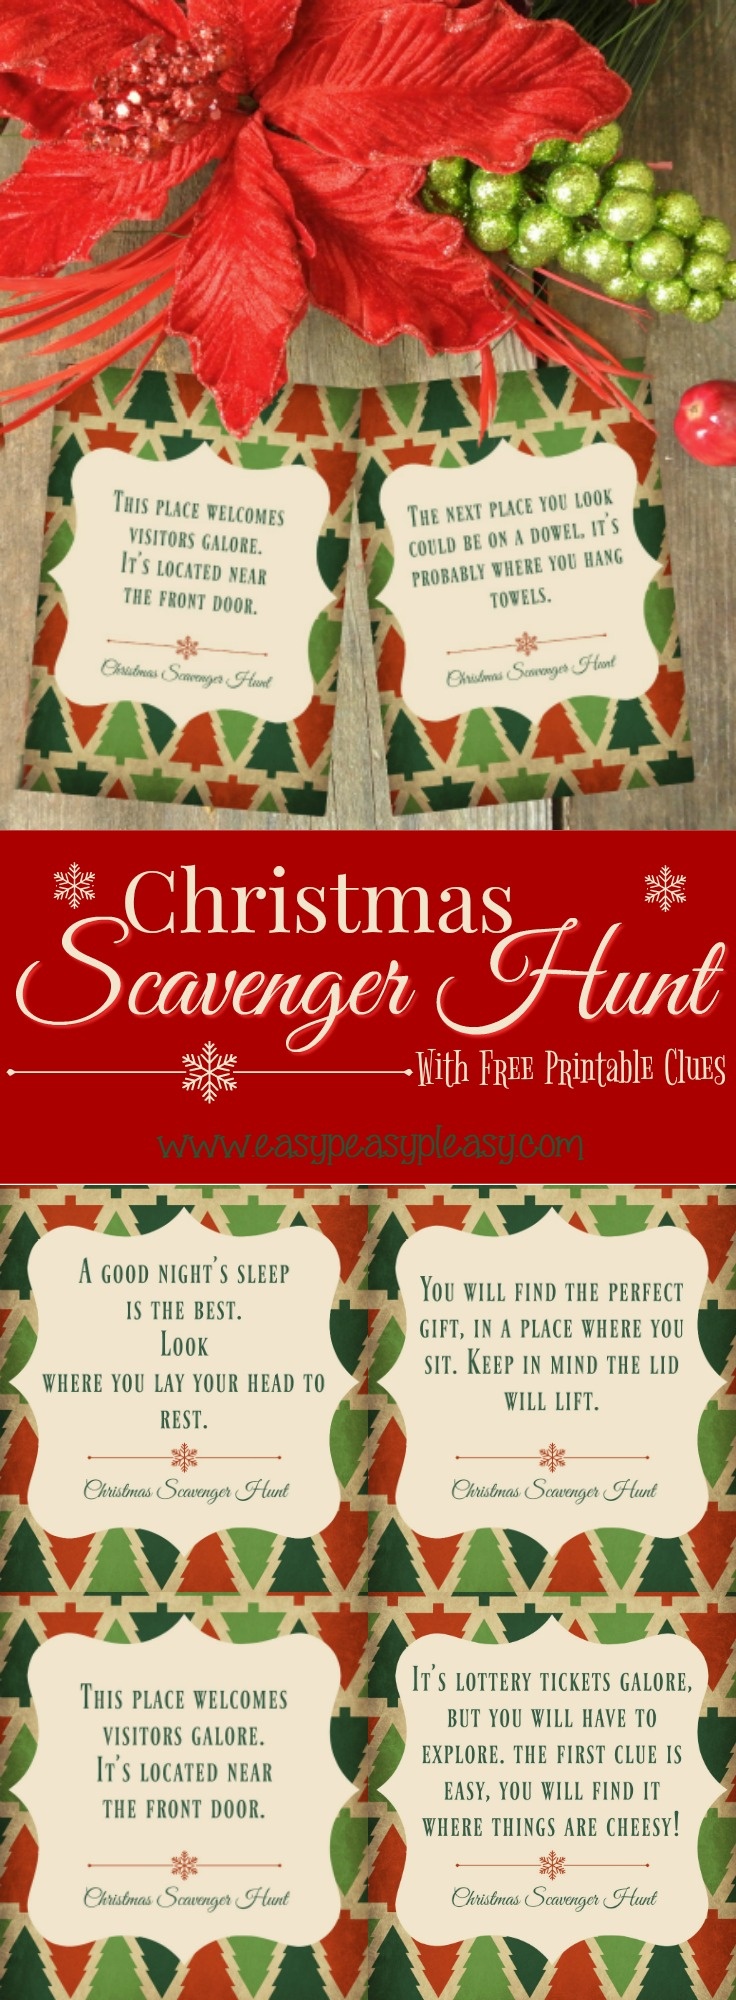 Christmas Scavenger Hunt With Free Printable Clues - Easy Peasy Pleasy - Free Printable Christmas Treasure Hunt Clues